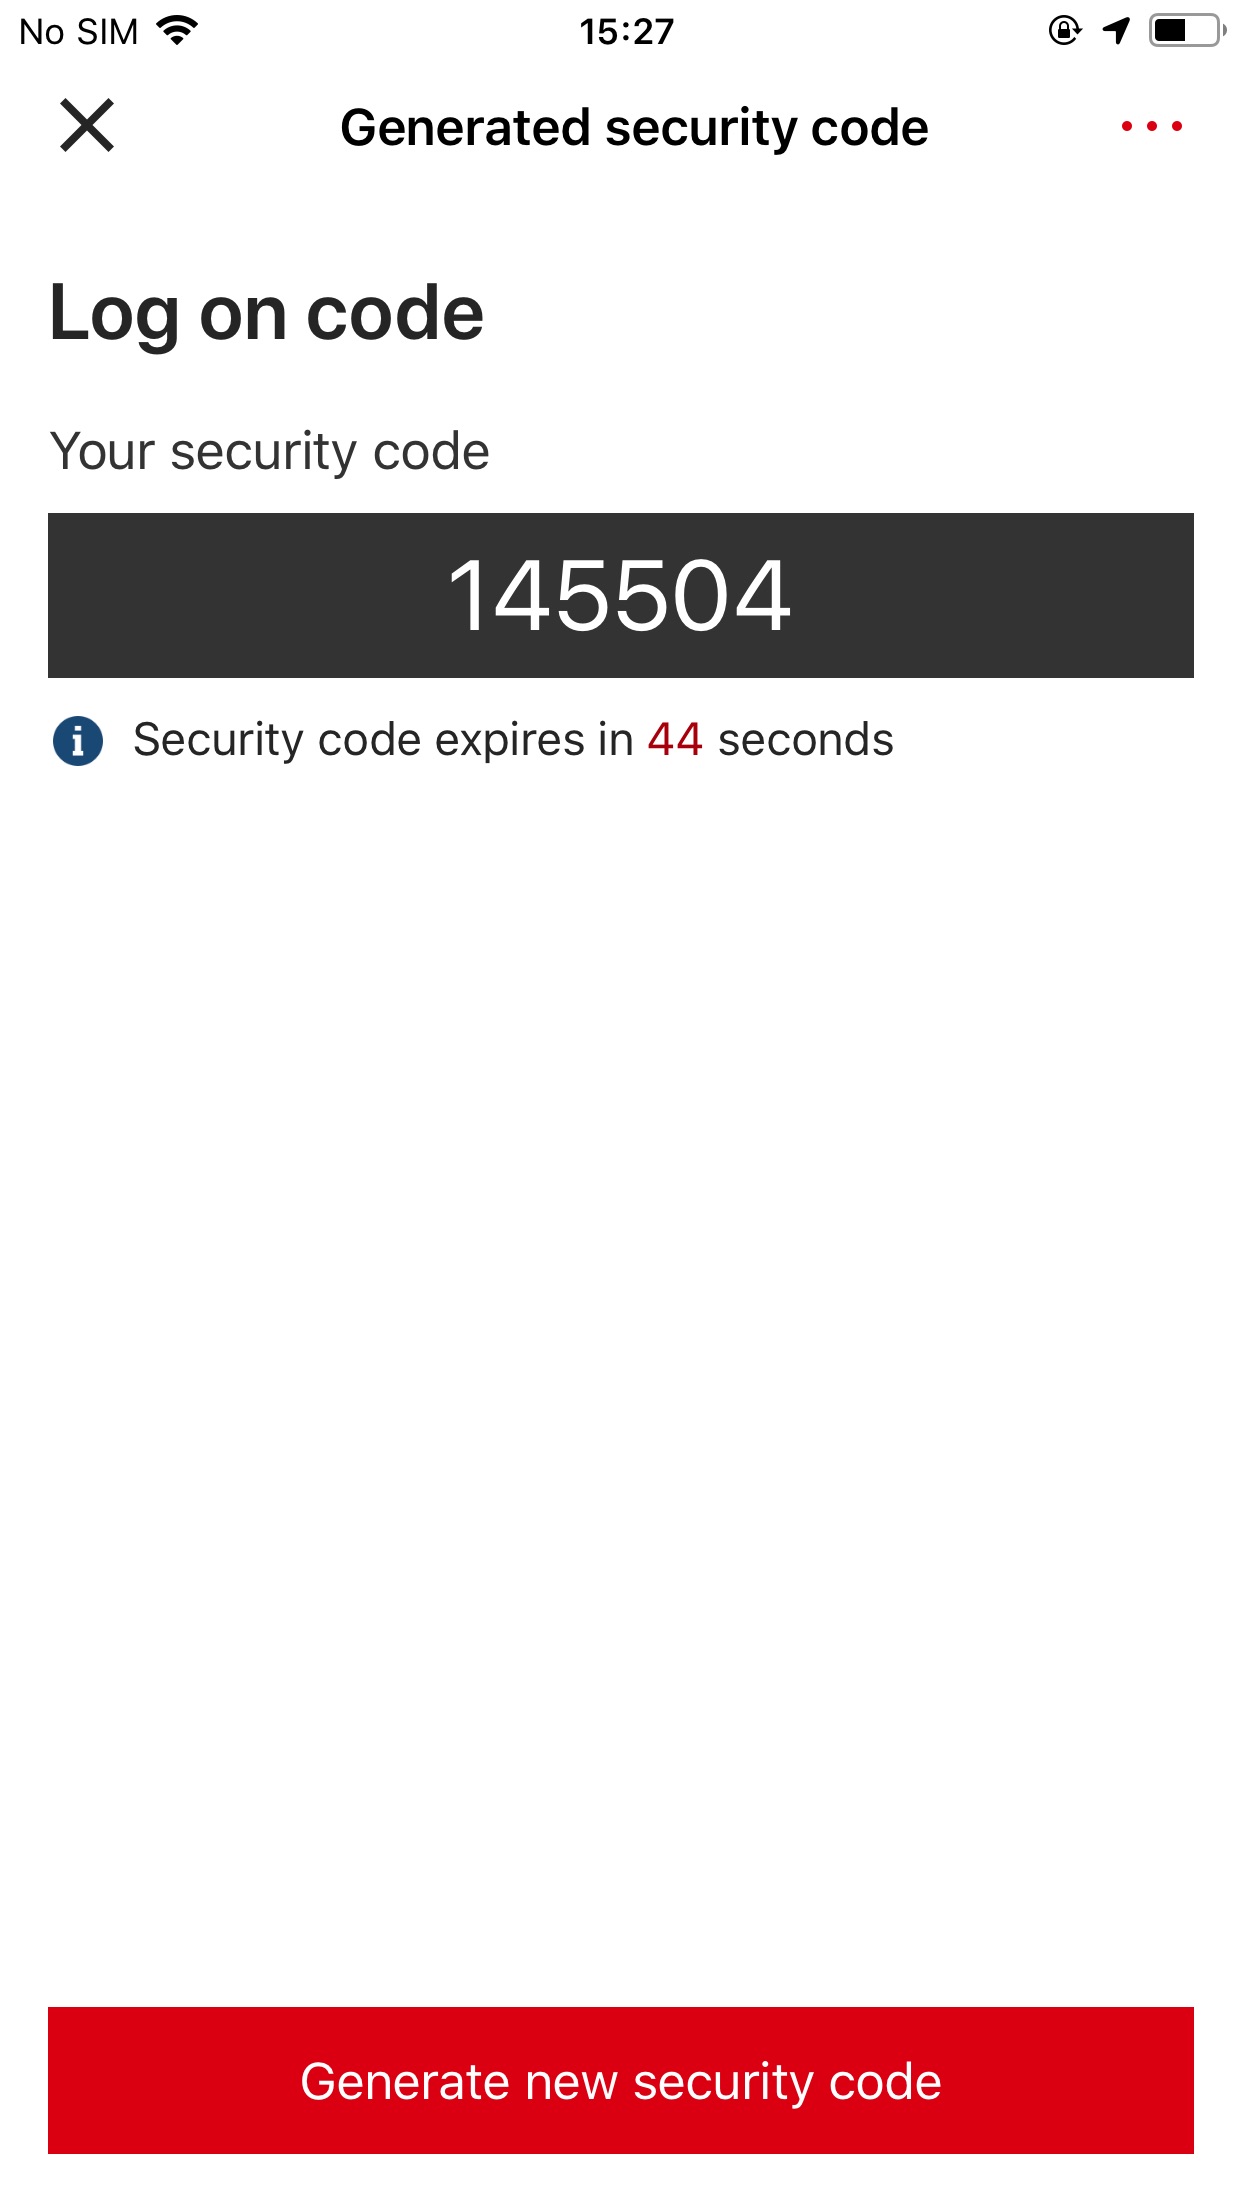 mobile banking app interface showing the gerneated security code